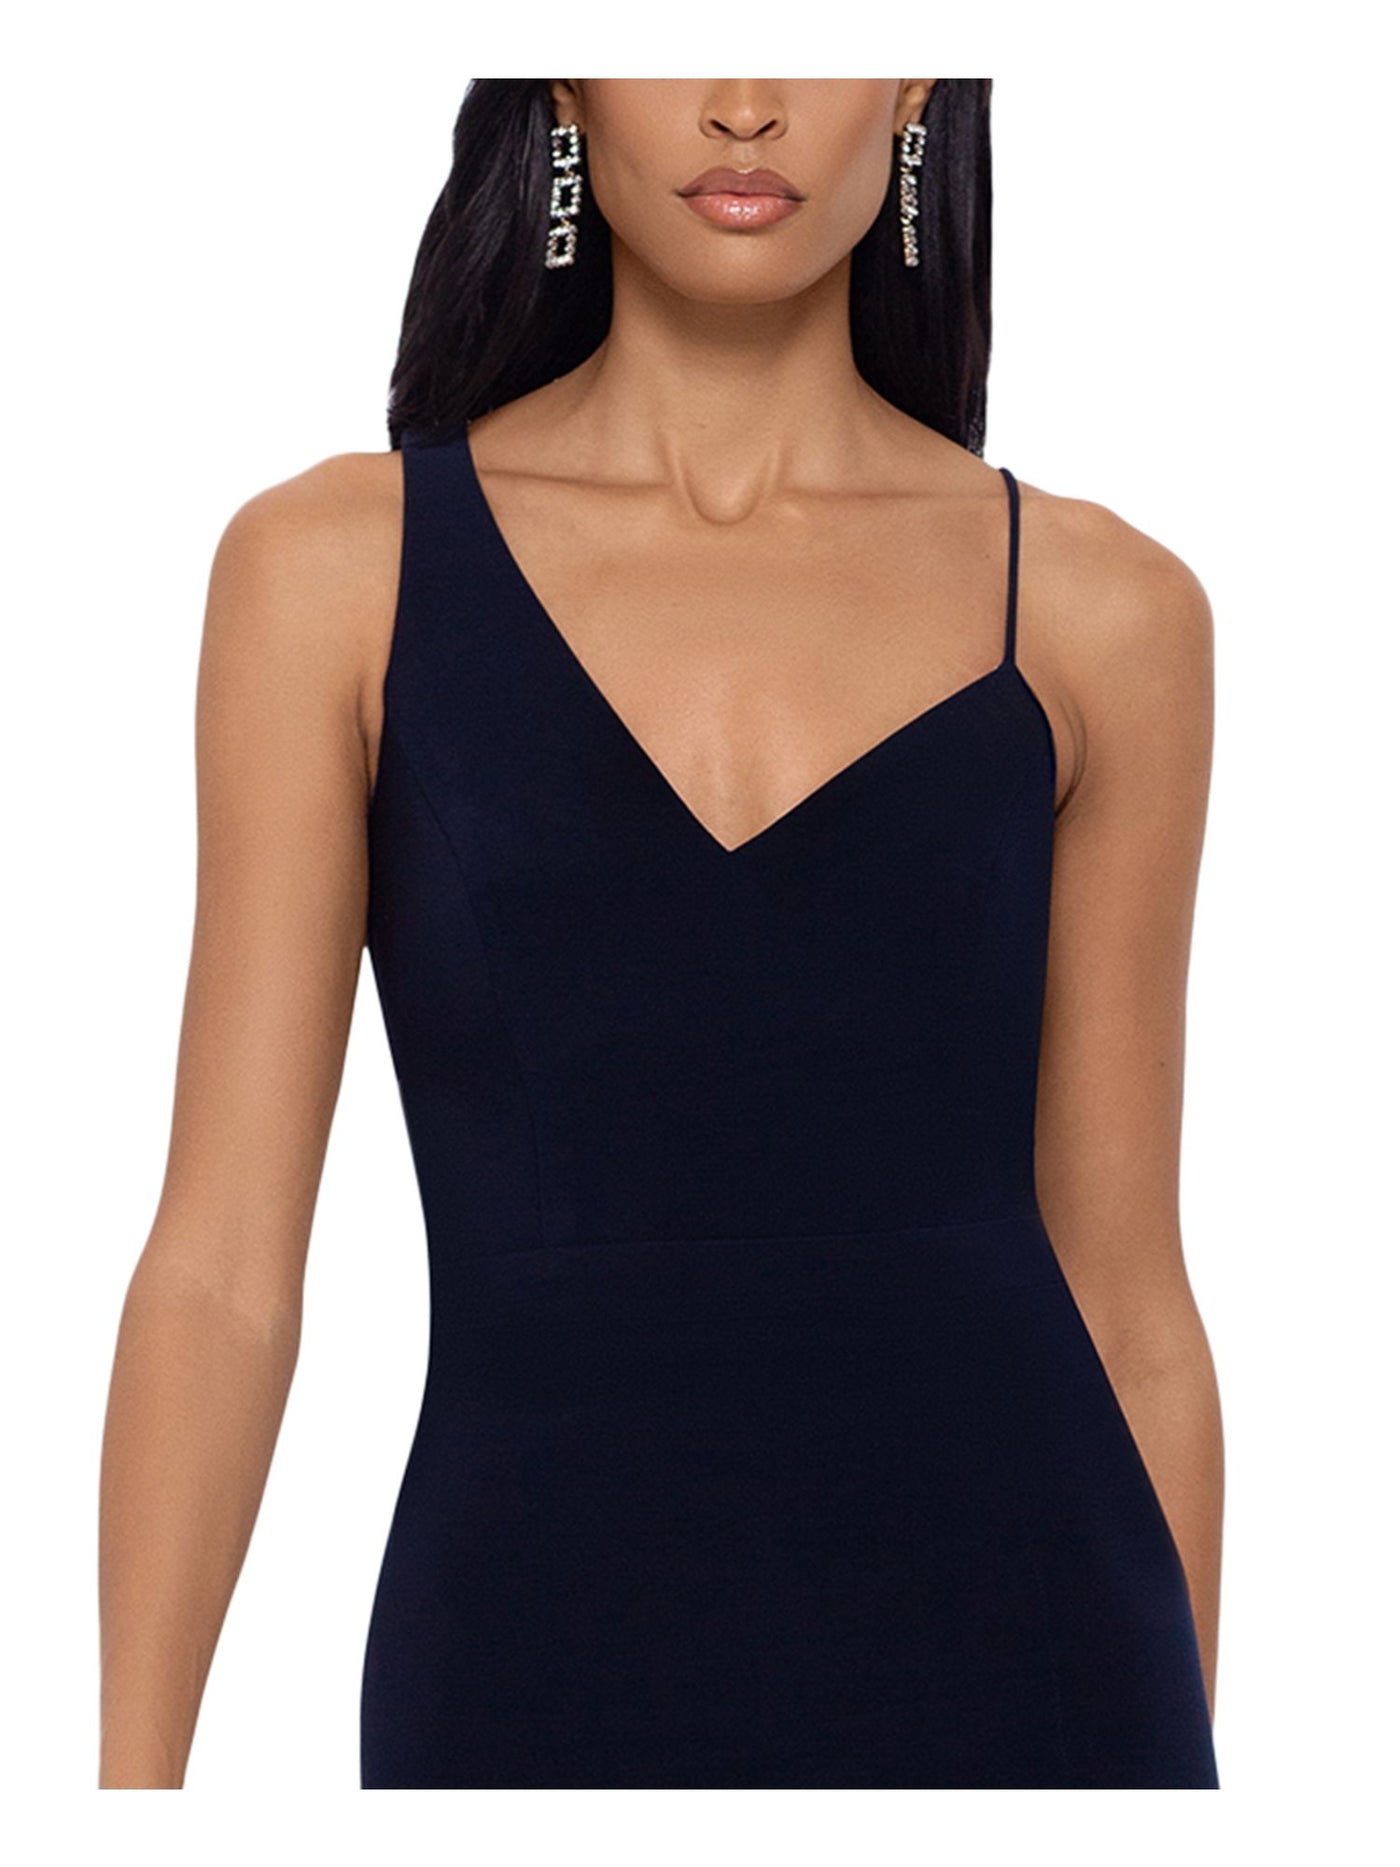 XSCAPE Womens Navy Stretch Slitted Zippered Straps One Wide One Spaghetti Sleeveless Asymmetrical Neckline Full-Length Formal Gown Dress 6